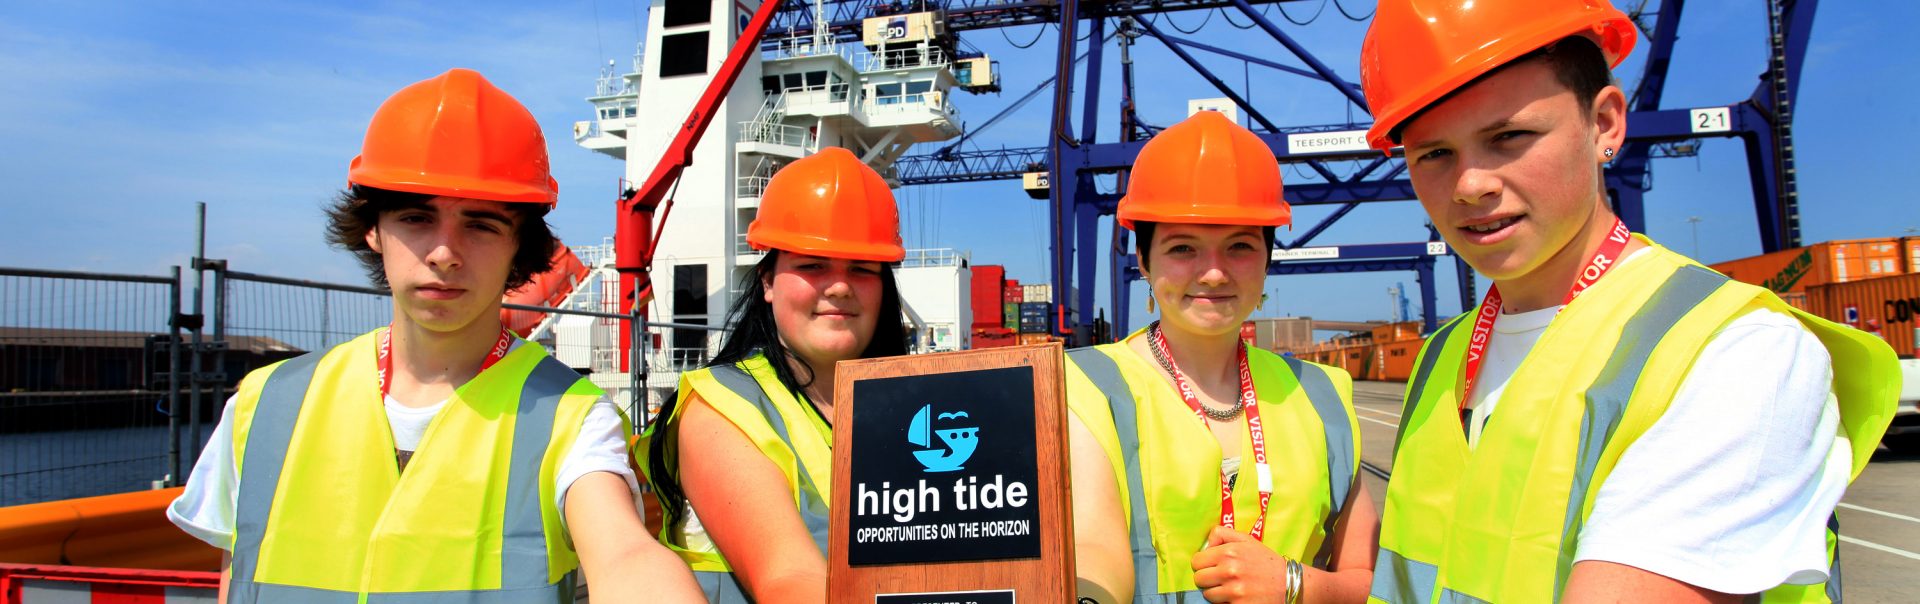 Students set sail into work placement